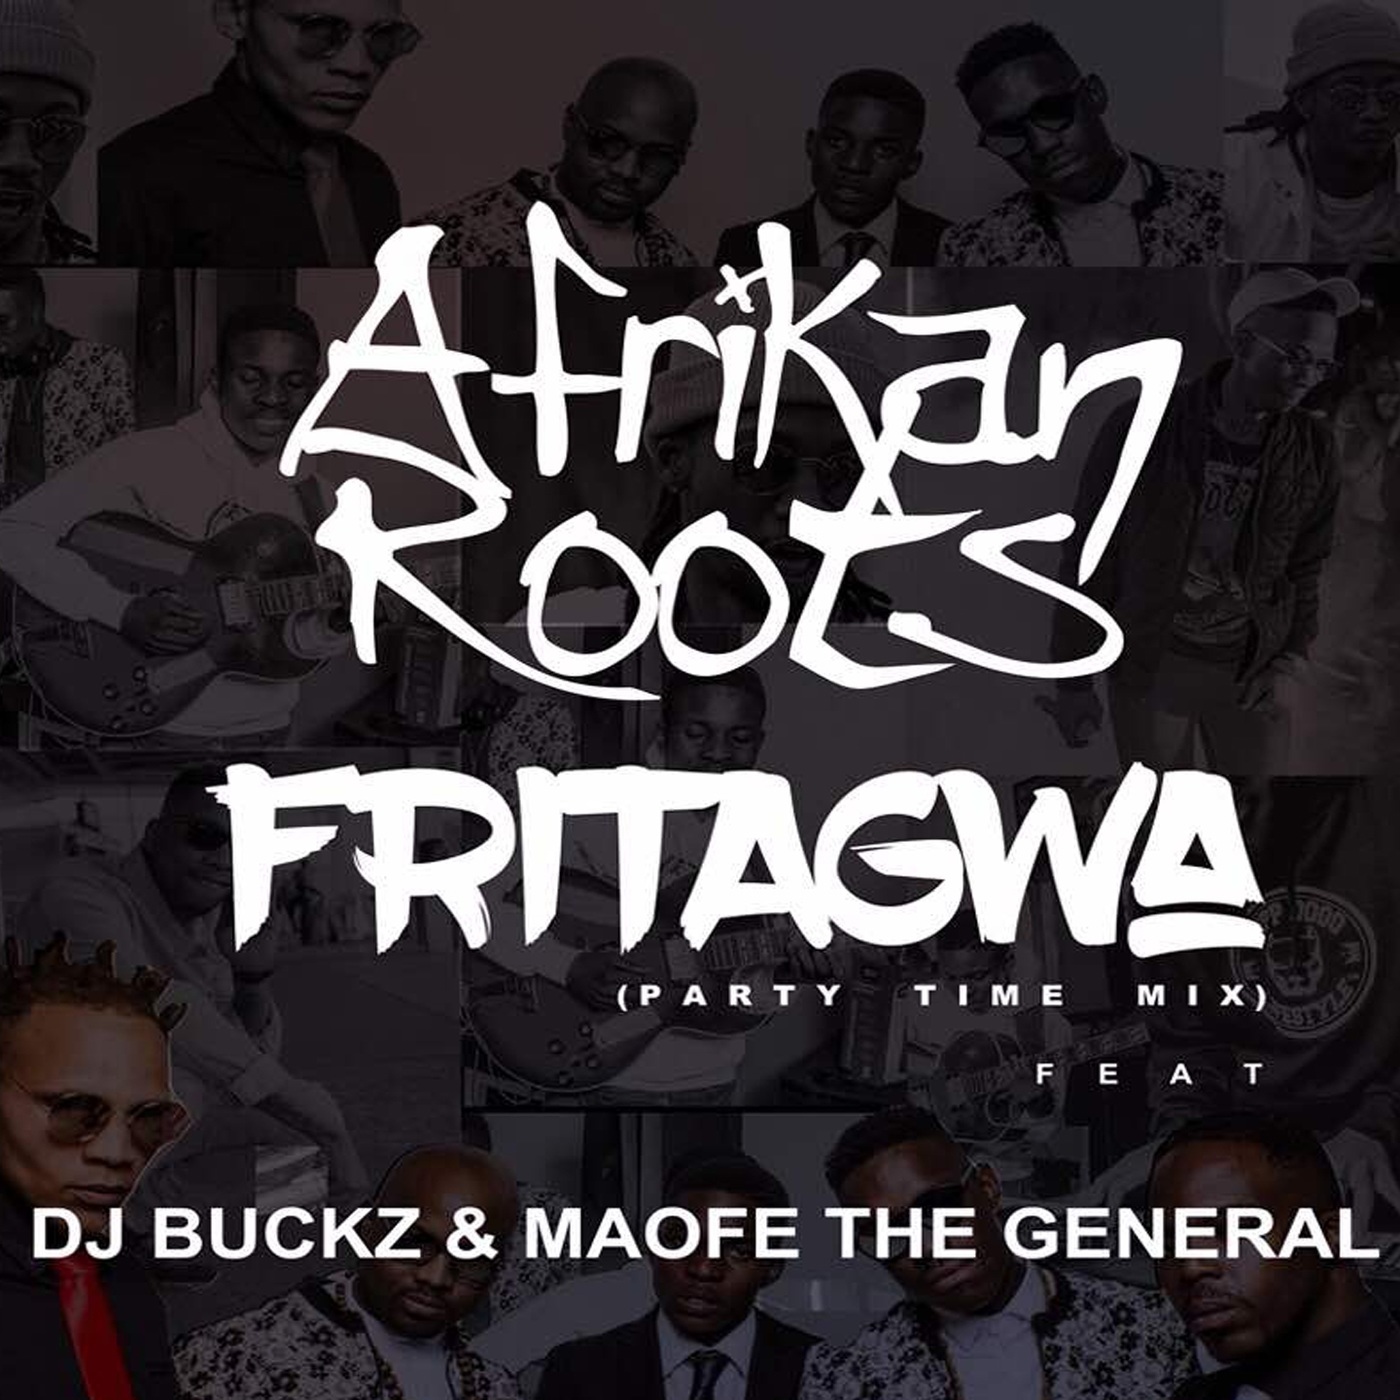 Afrikan Roots - FriTagwa (Party Time Mix) / Roots Kollective